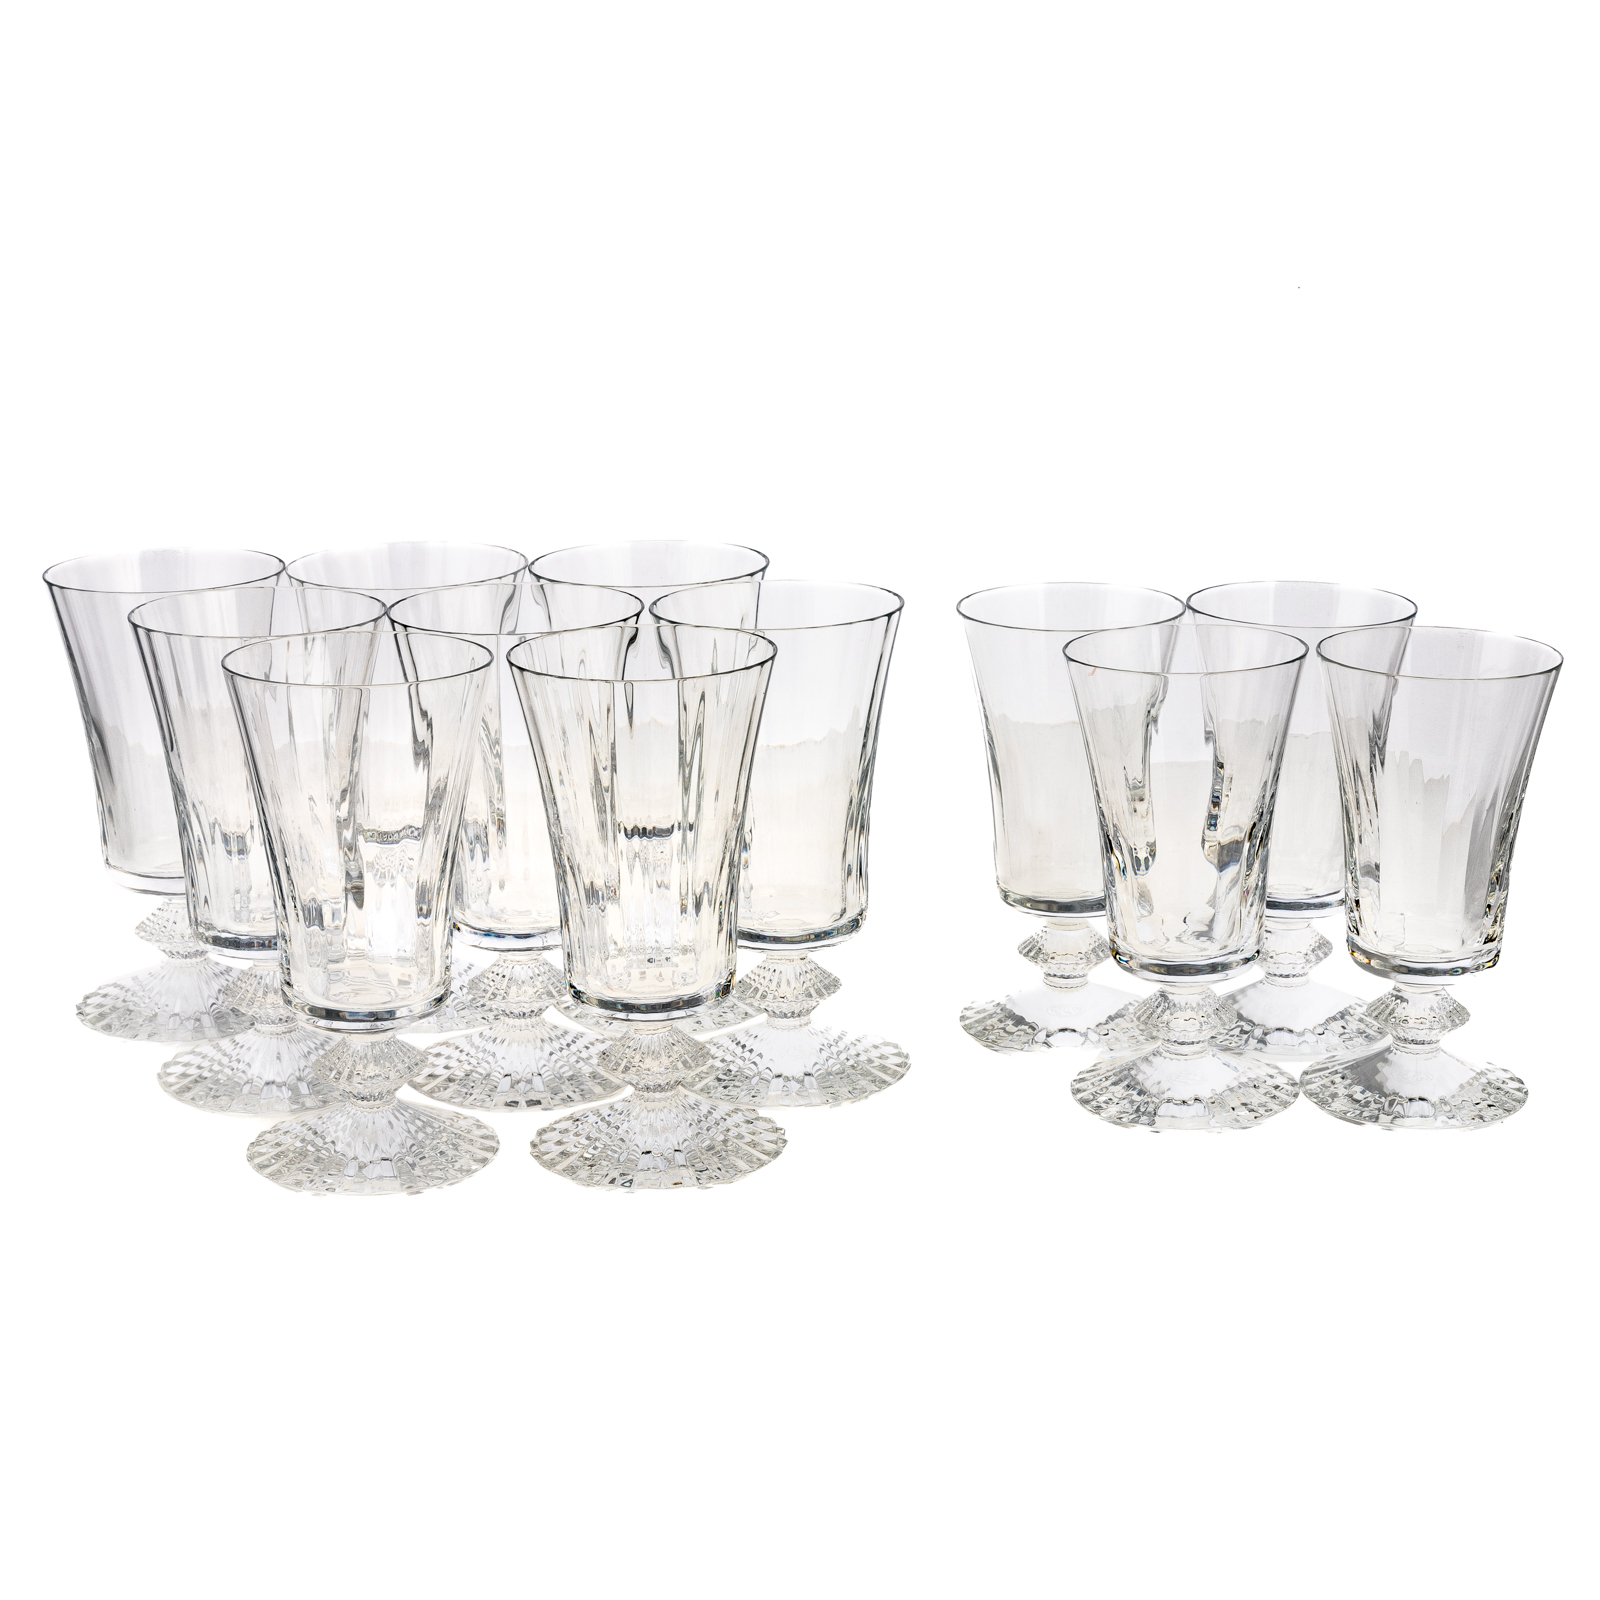 12 BACCARAT CRYSTAL MILLE NUITS 369989